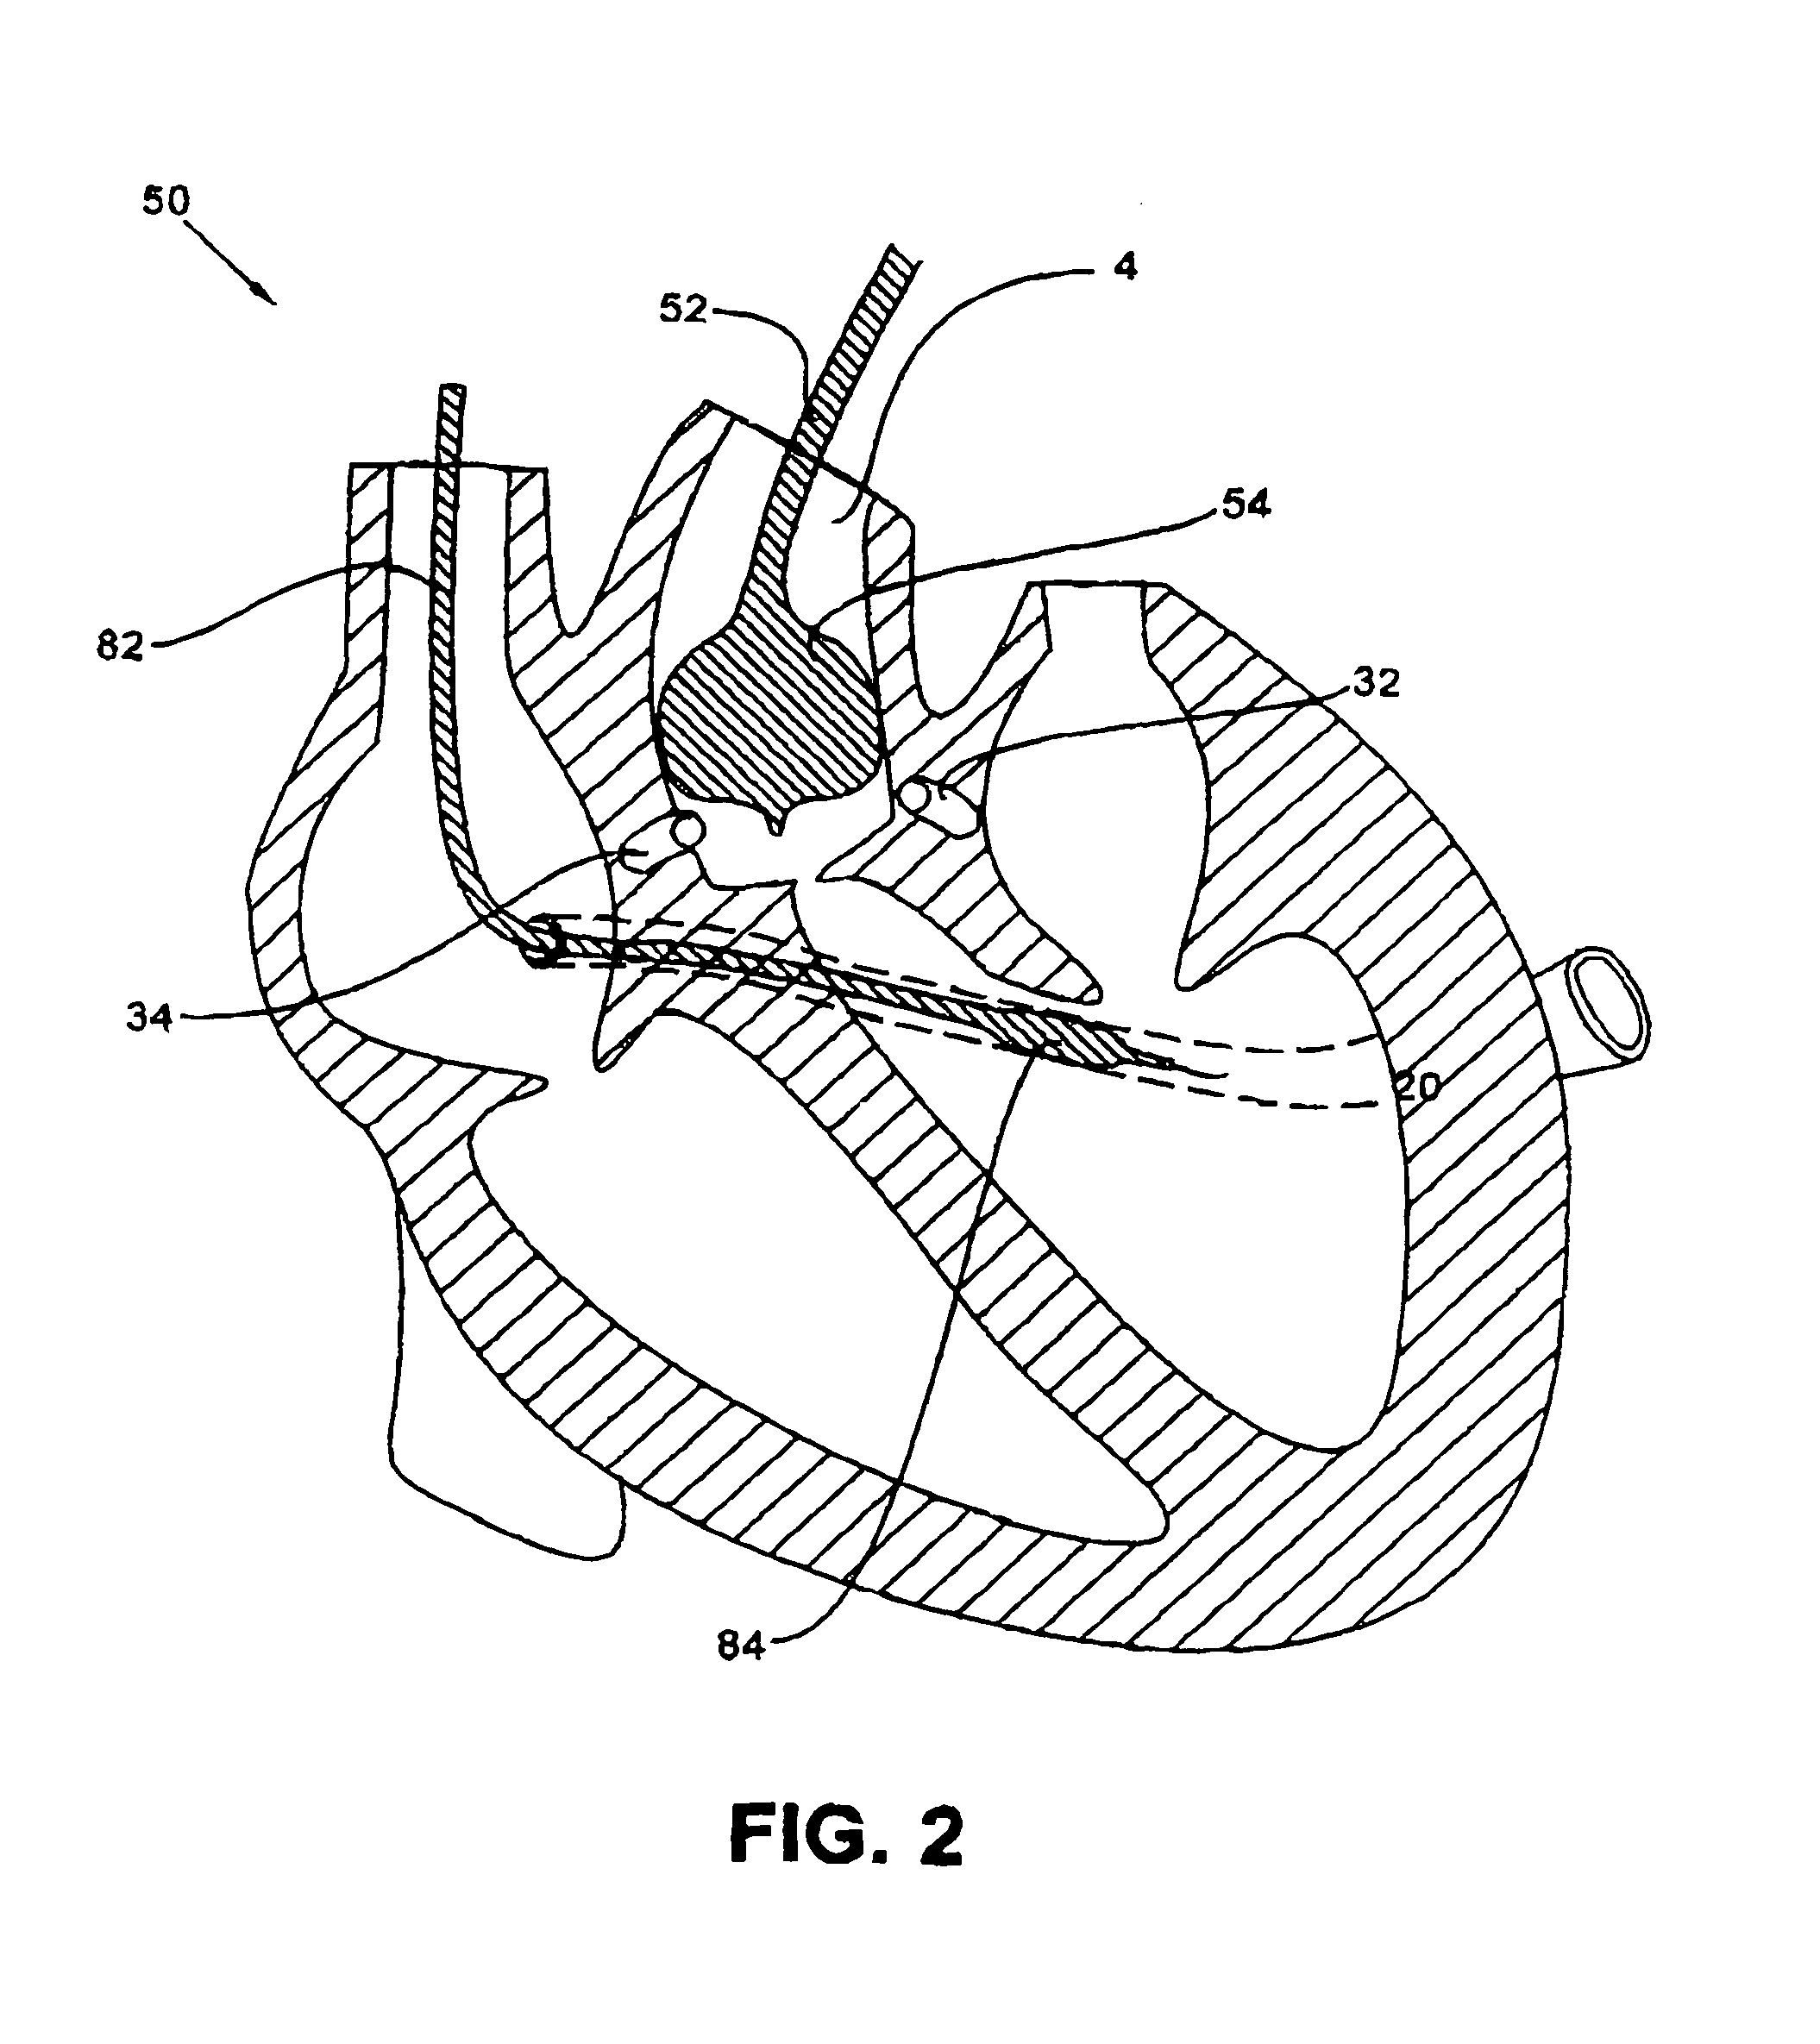 Conduit system for isolation of fluids in biological tissues